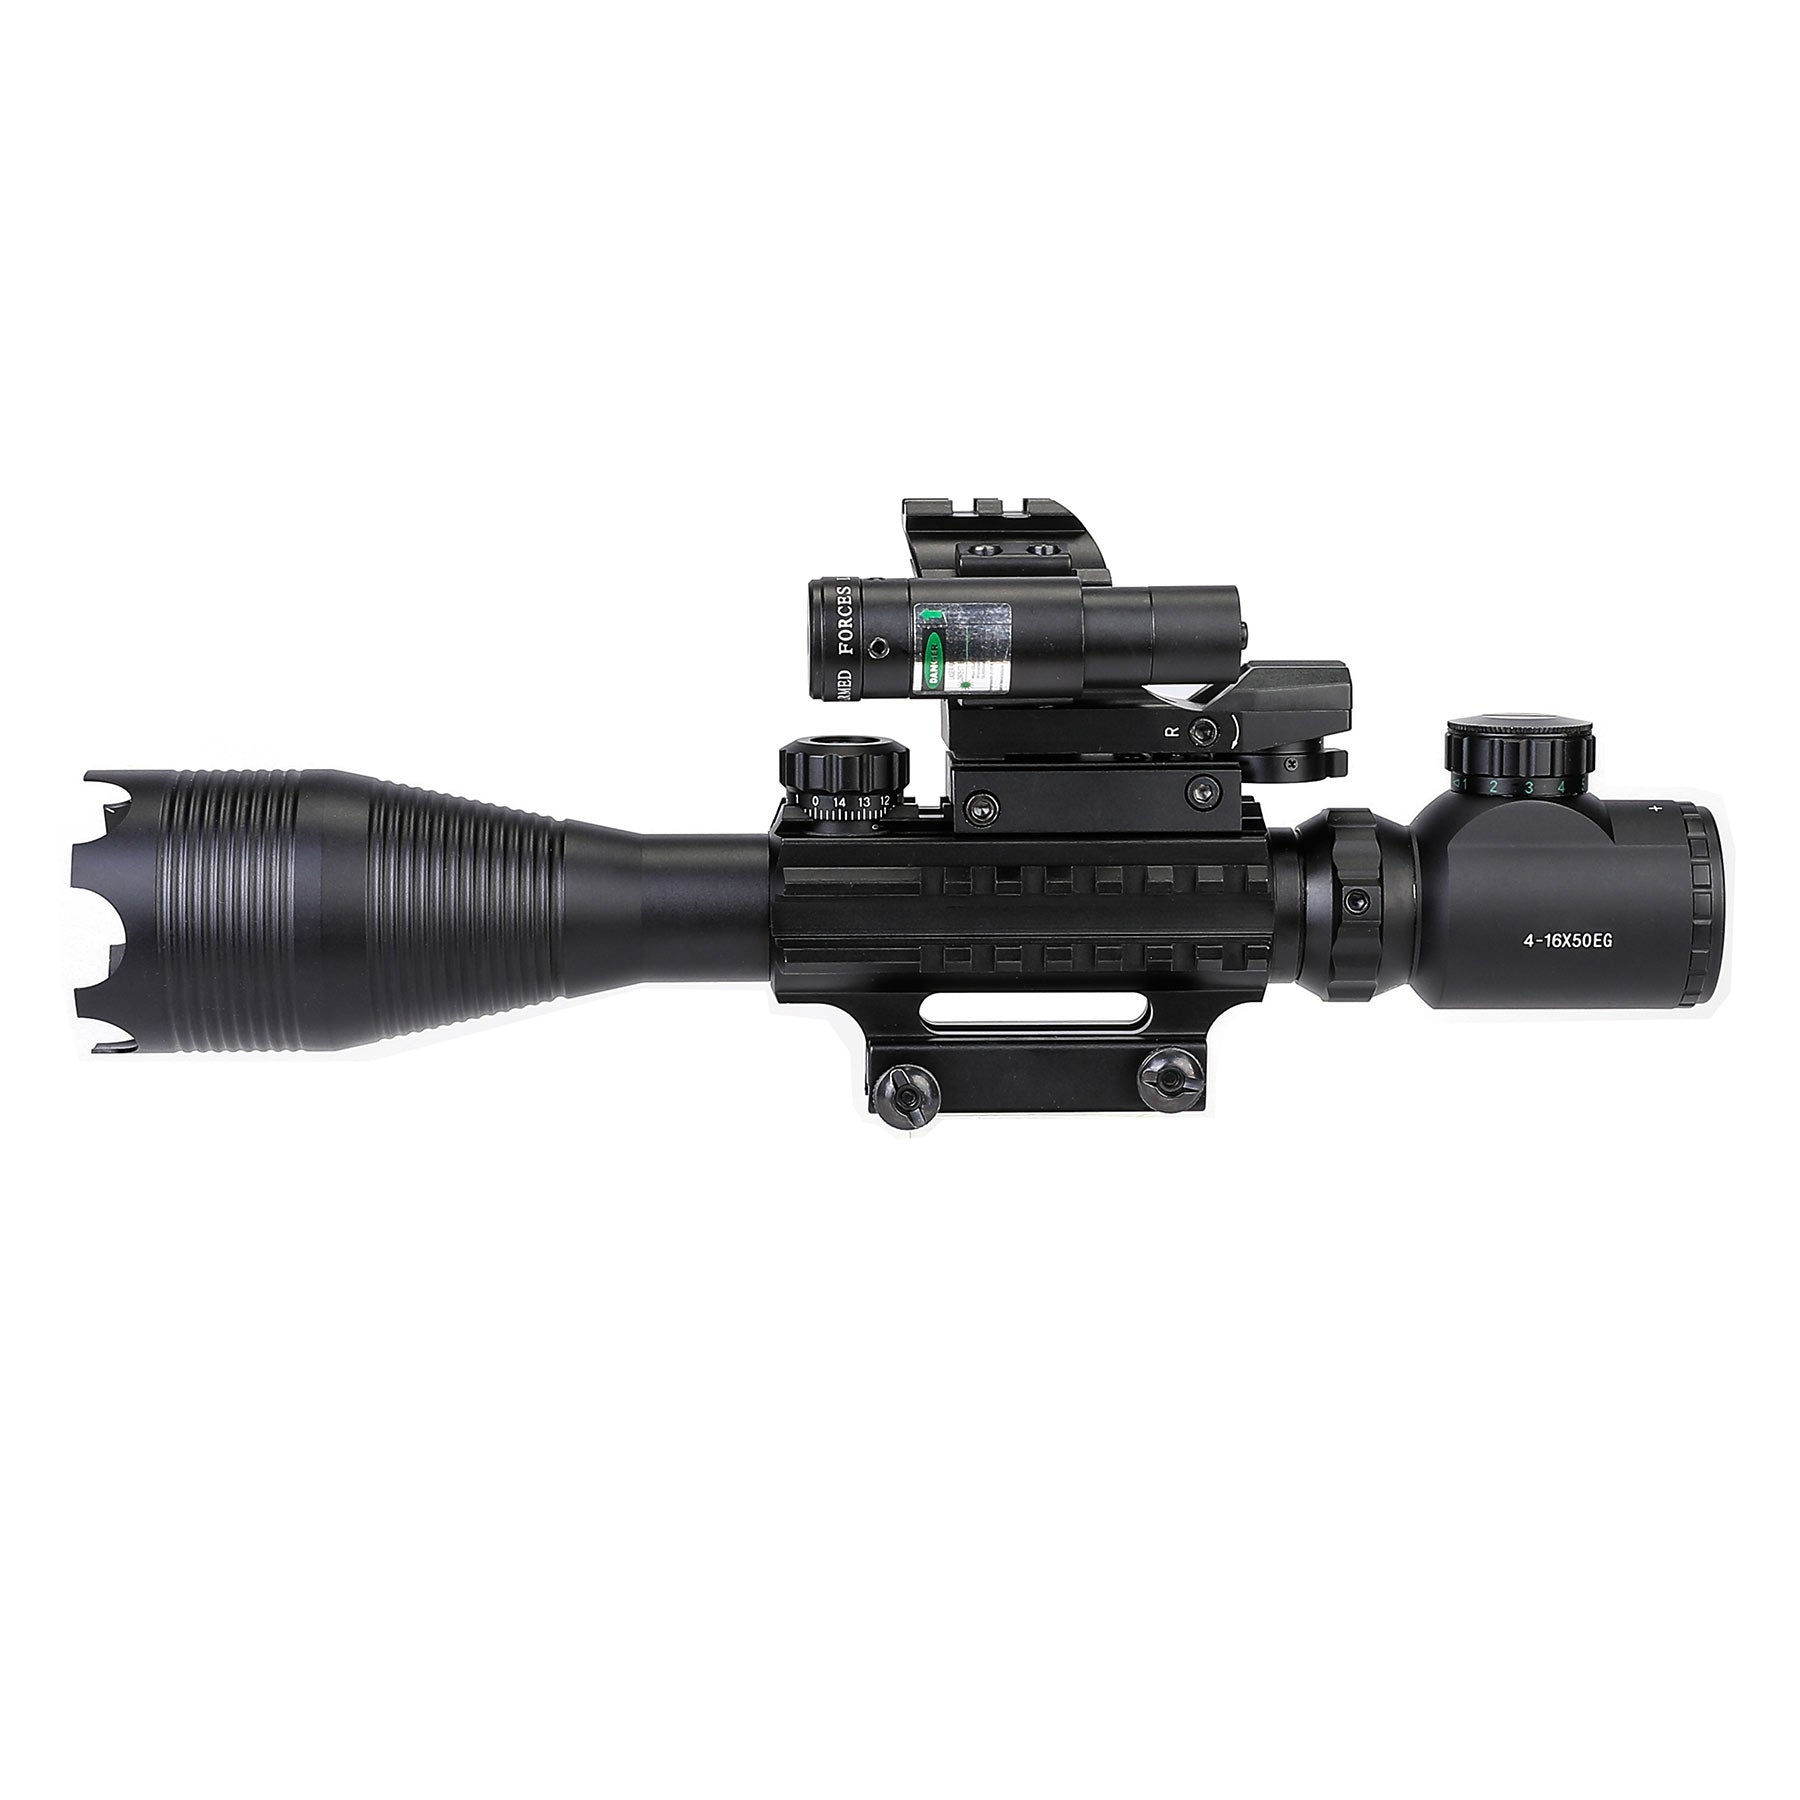 ed dot sight; rifle scope; vortex scope; night vision scope; holosun; magpul; rifle scopes; tactical; ar - 15 accessories; thermal scope; air rifle; red dot; scope